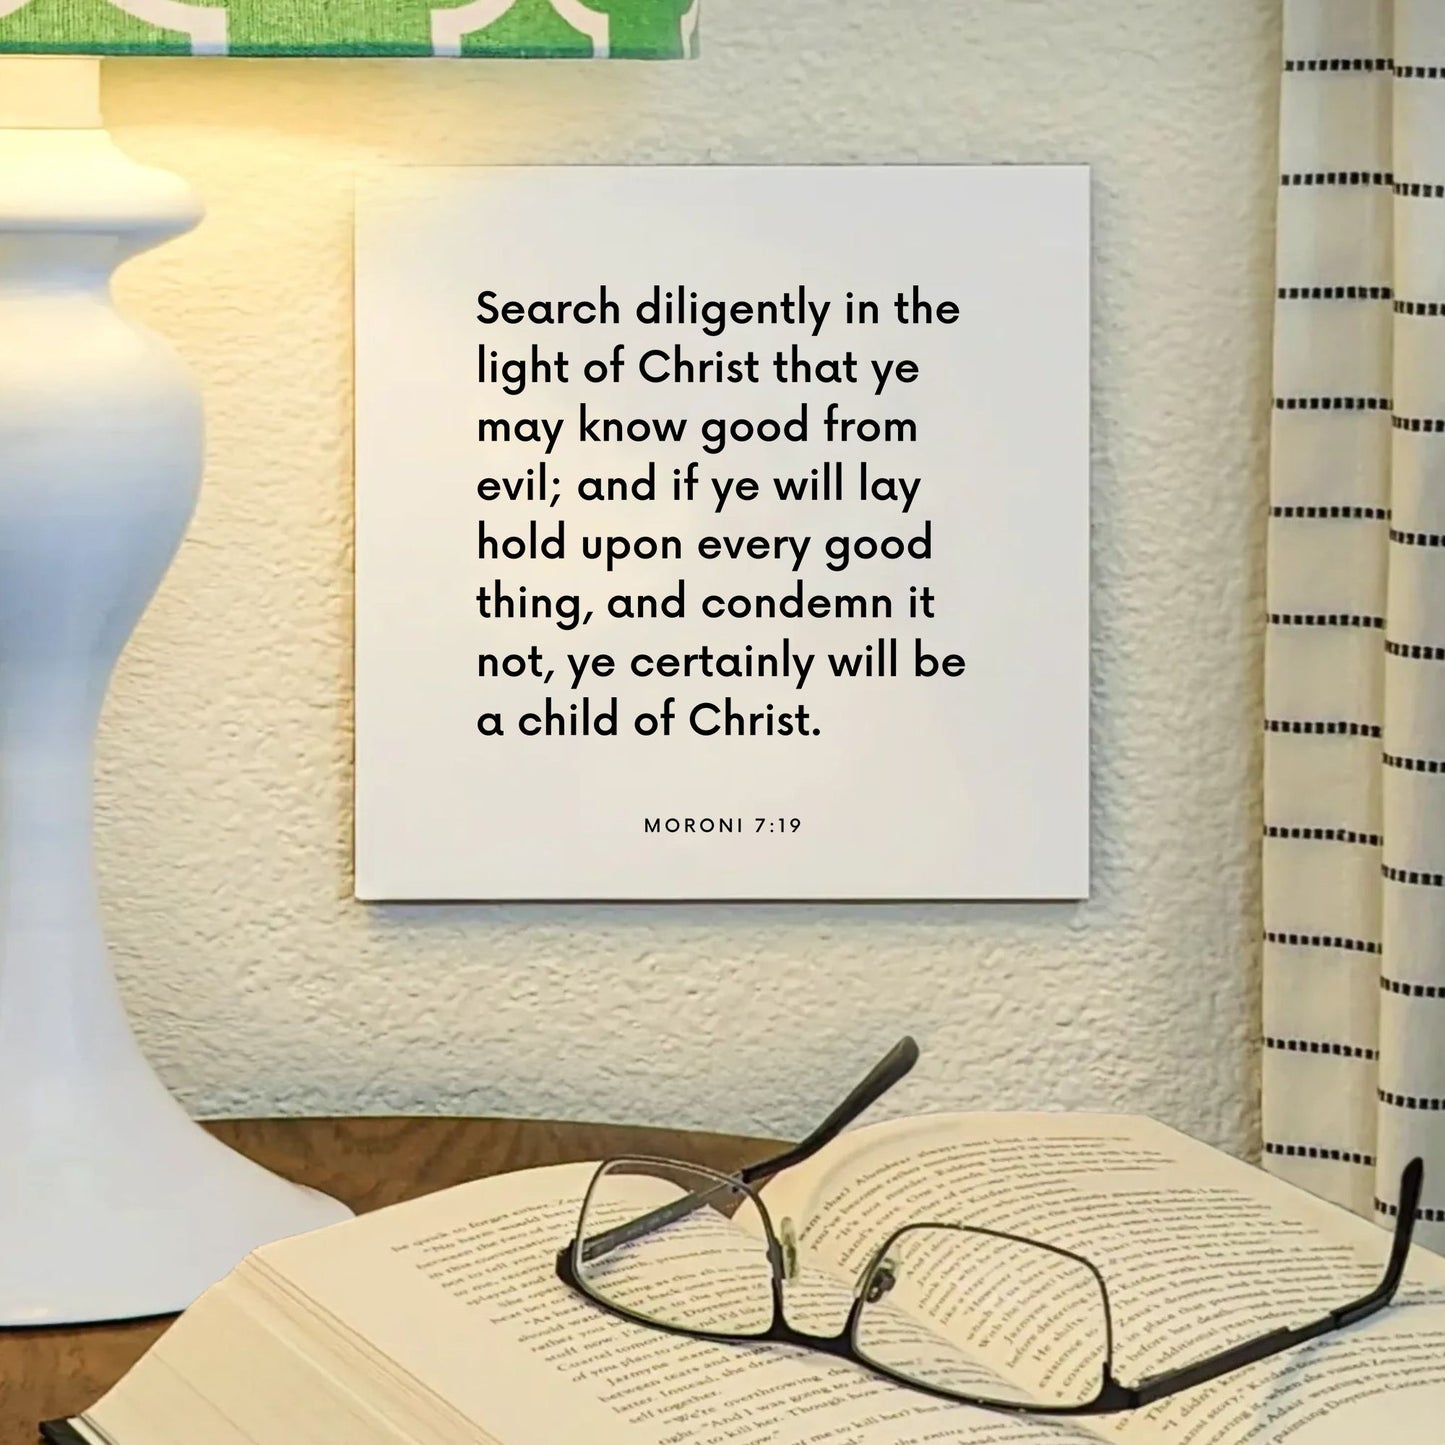 Lamp mouting of the scripture tile for Moroni 7:19 - "Search diligently in the light of Christ"